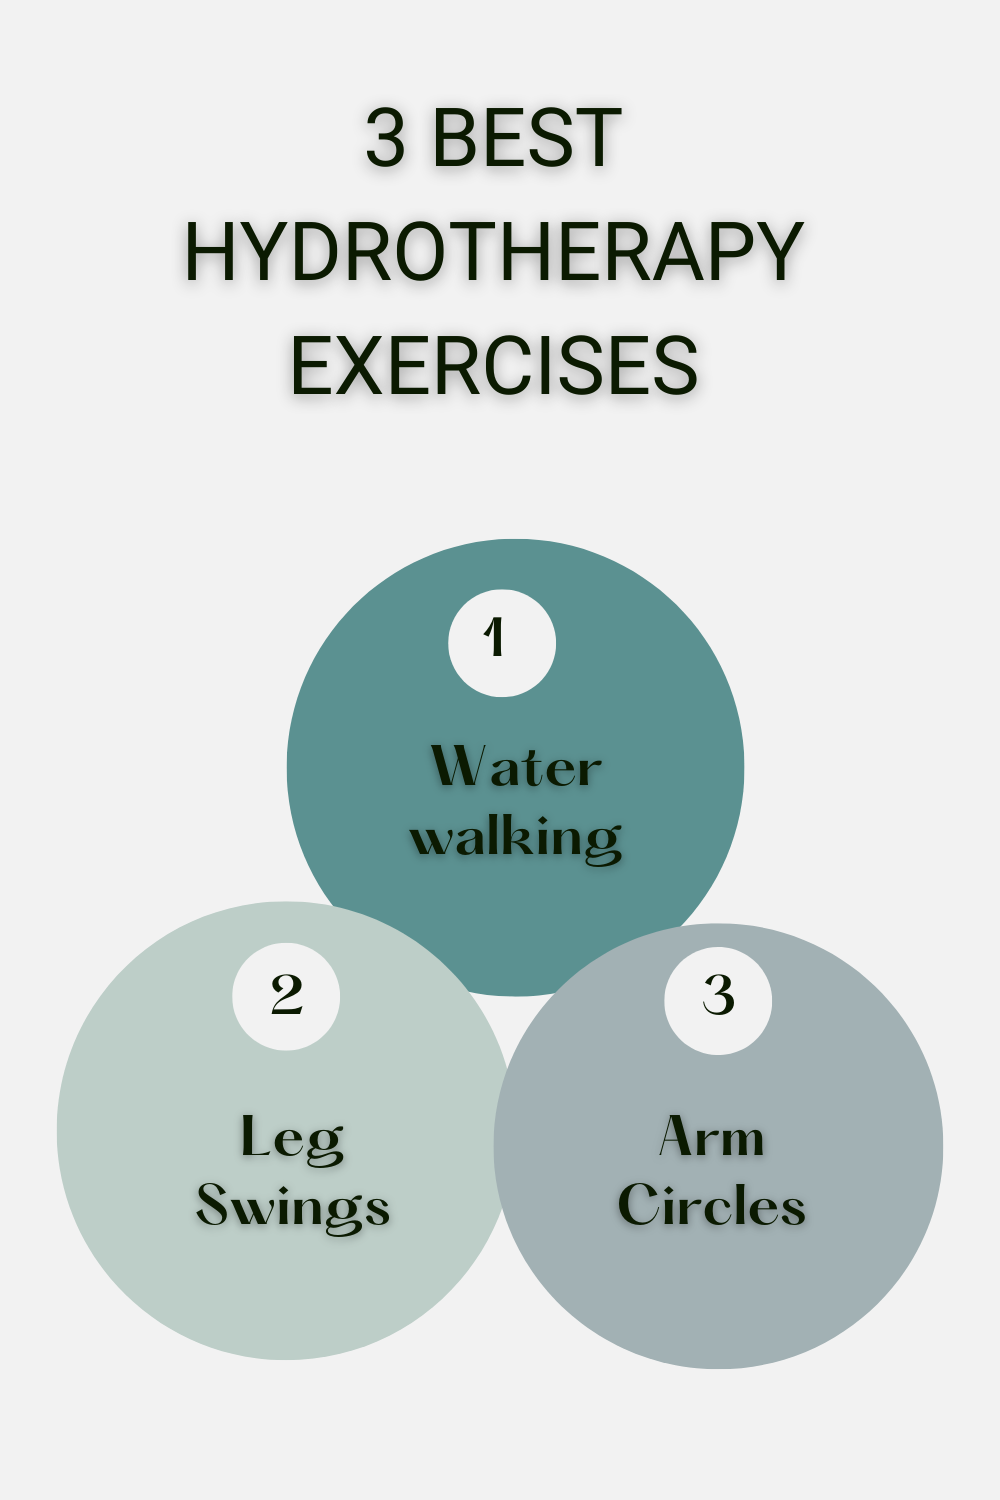 Arm Circles Hydrotherapy Exercises Leg Swings stretch water walking